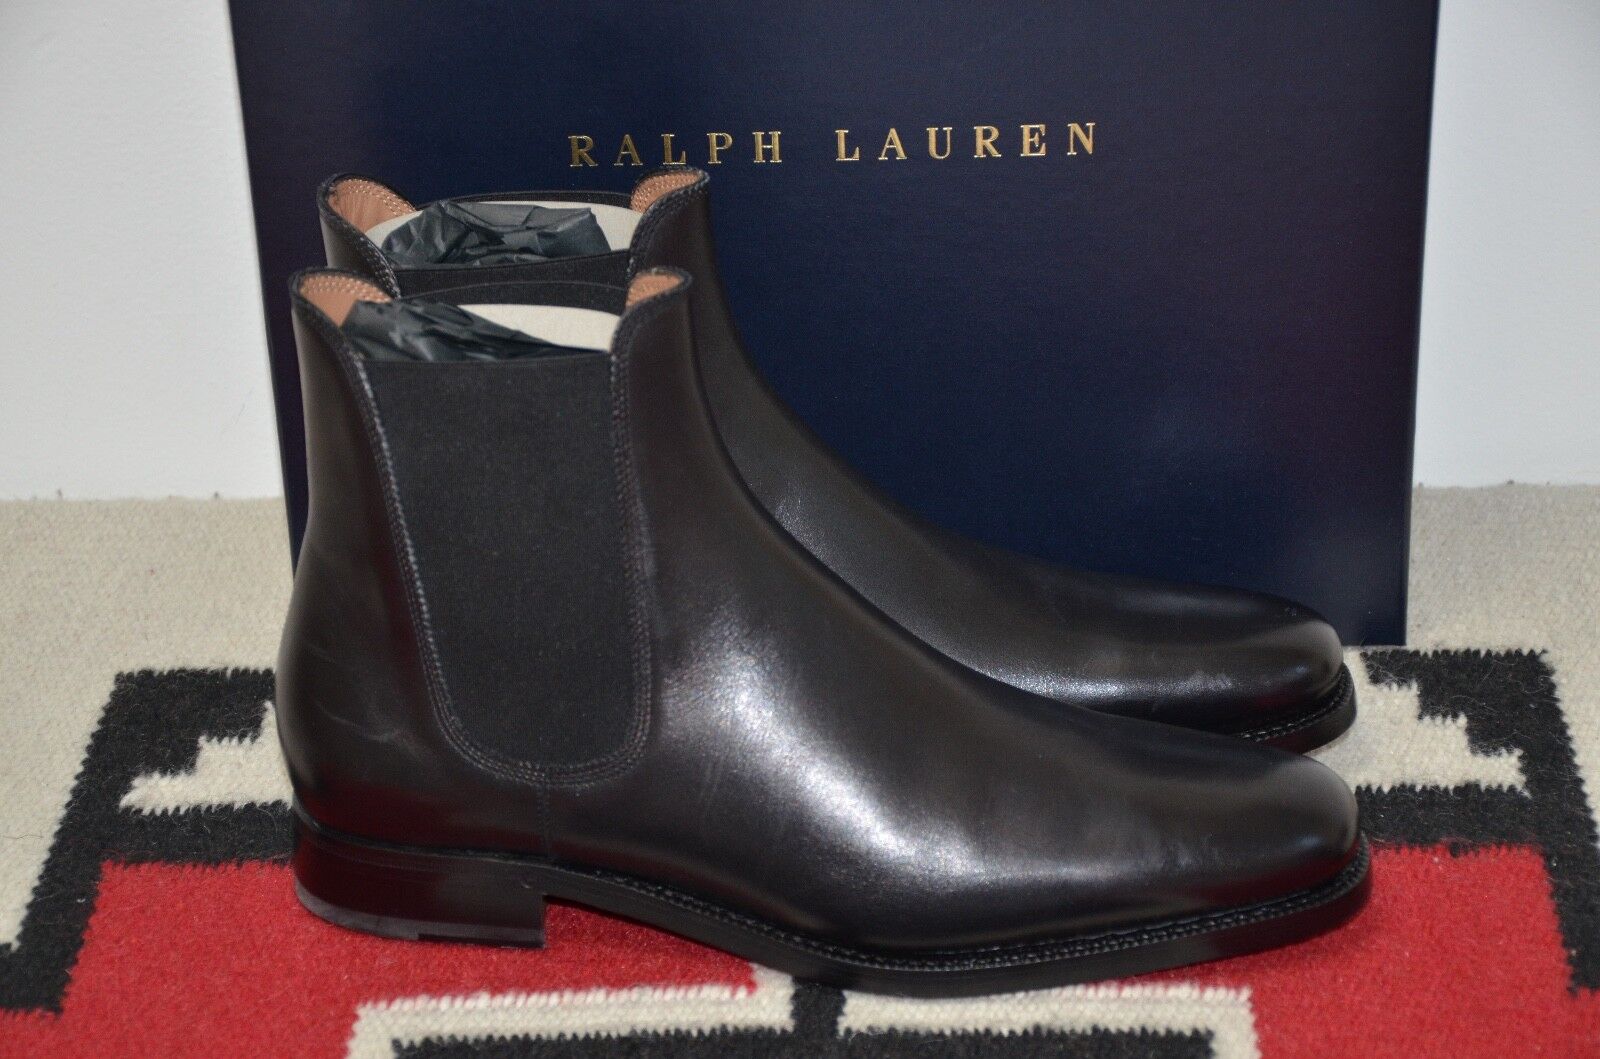 Ralph Lauren Purple Label Made in Italy Penfield Leather Ankle Boots